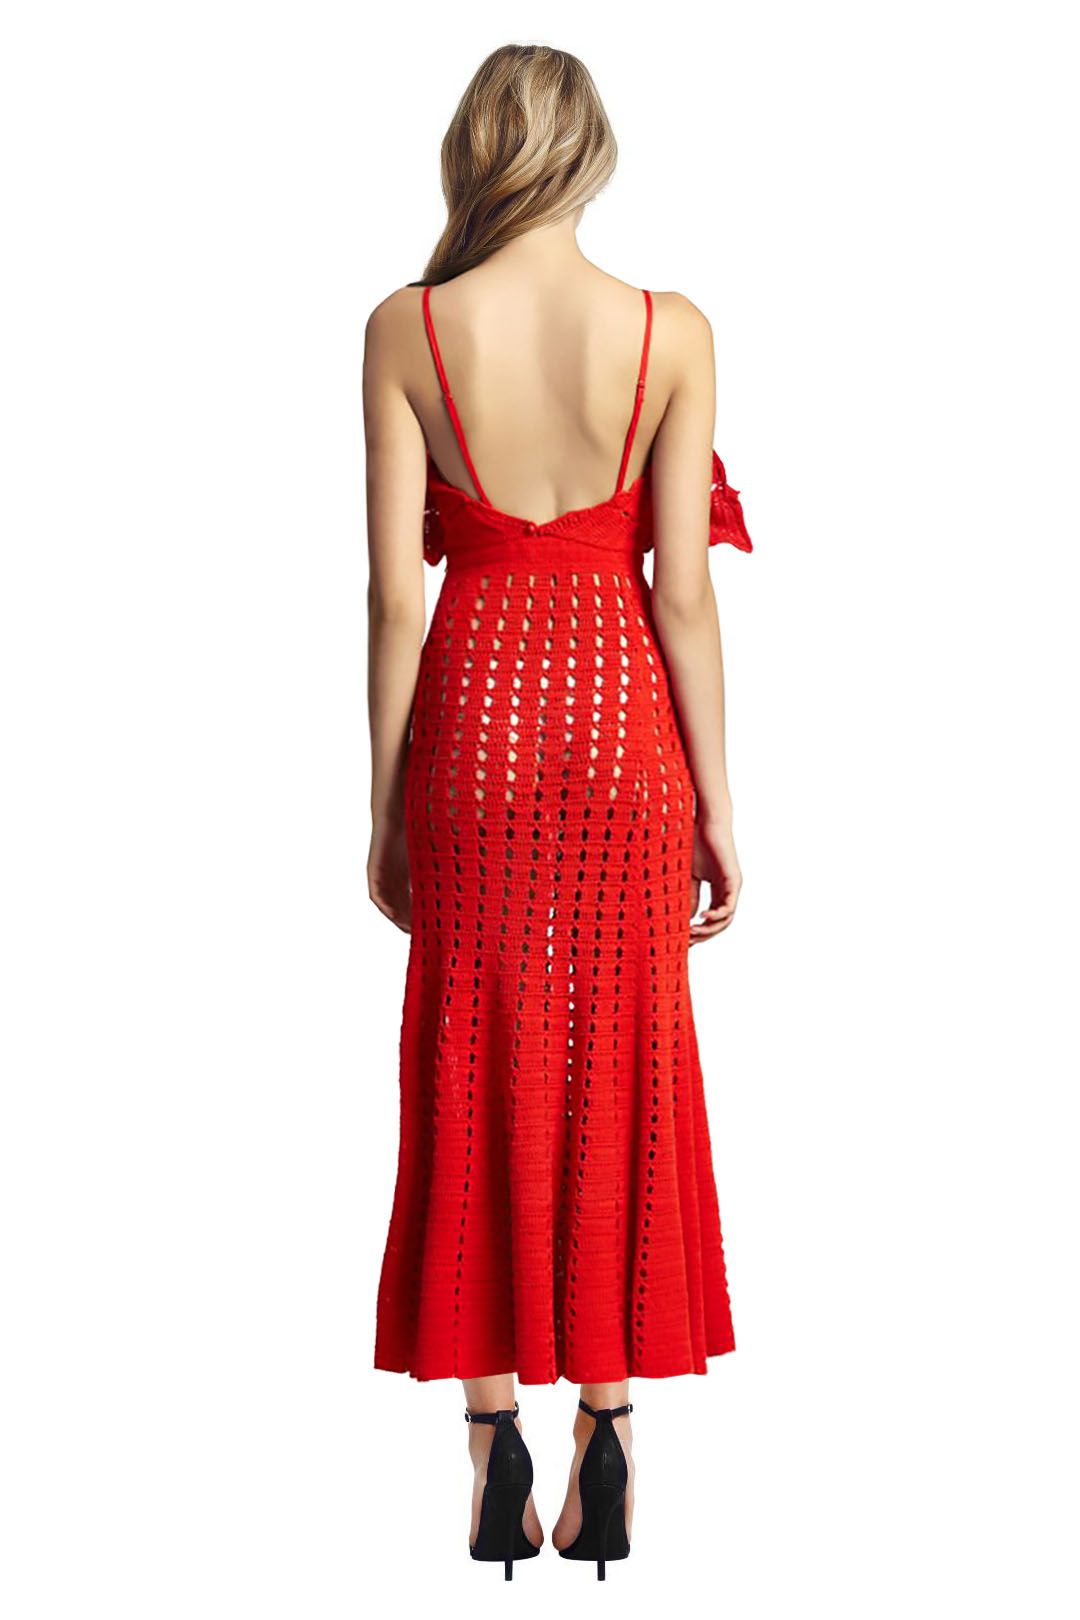 Alice McCall - Room is on Fire Dress - Red - Back